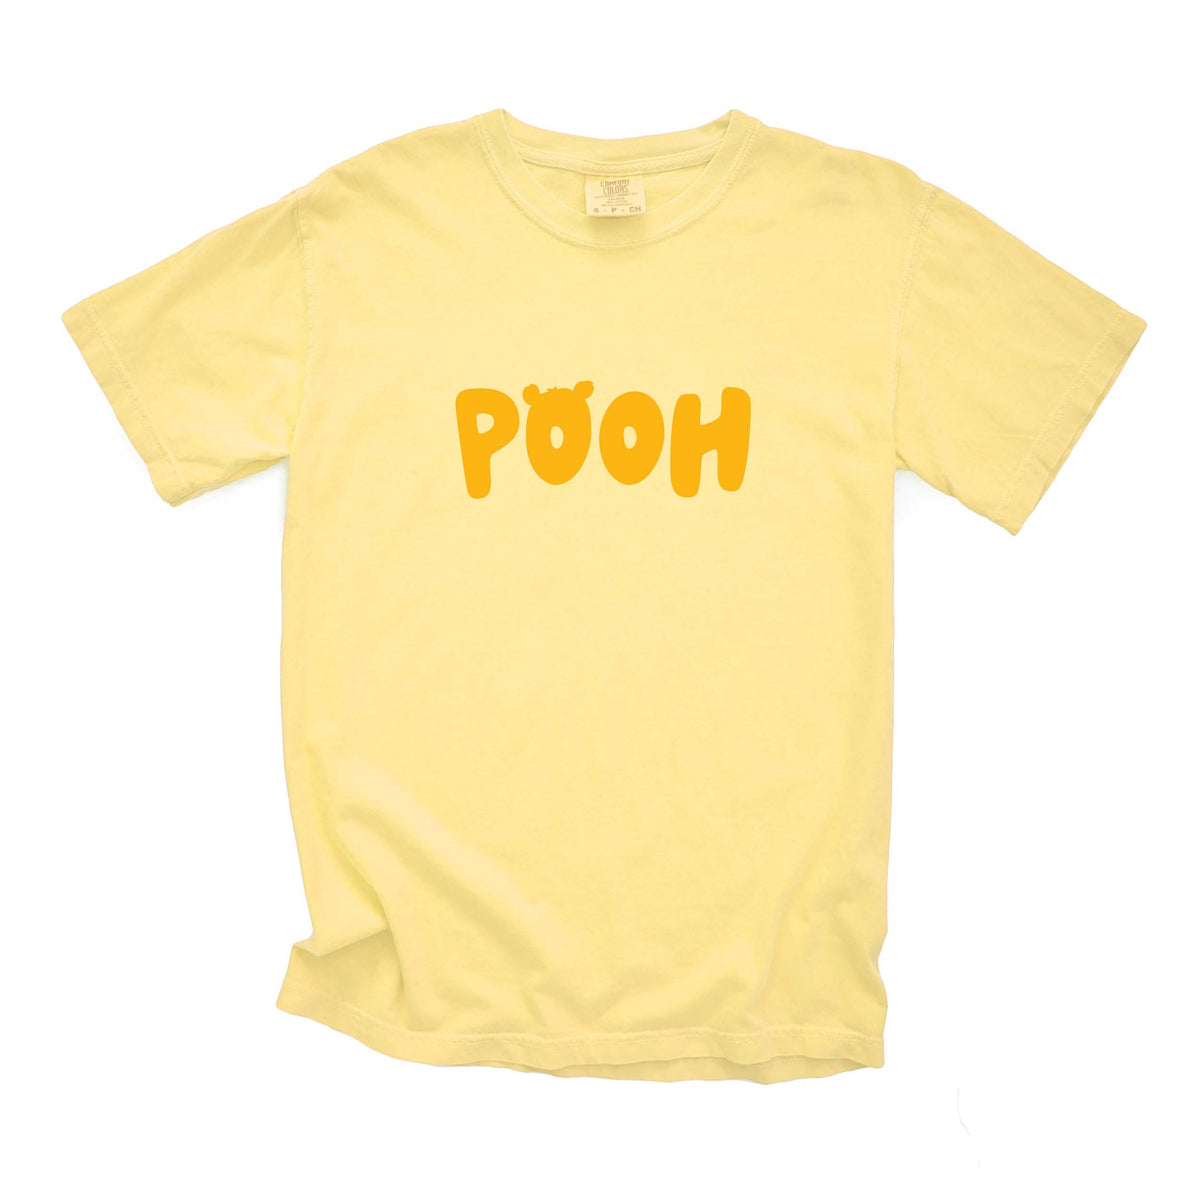 disney-parks-t-shirt-yellow-with-pooh-design